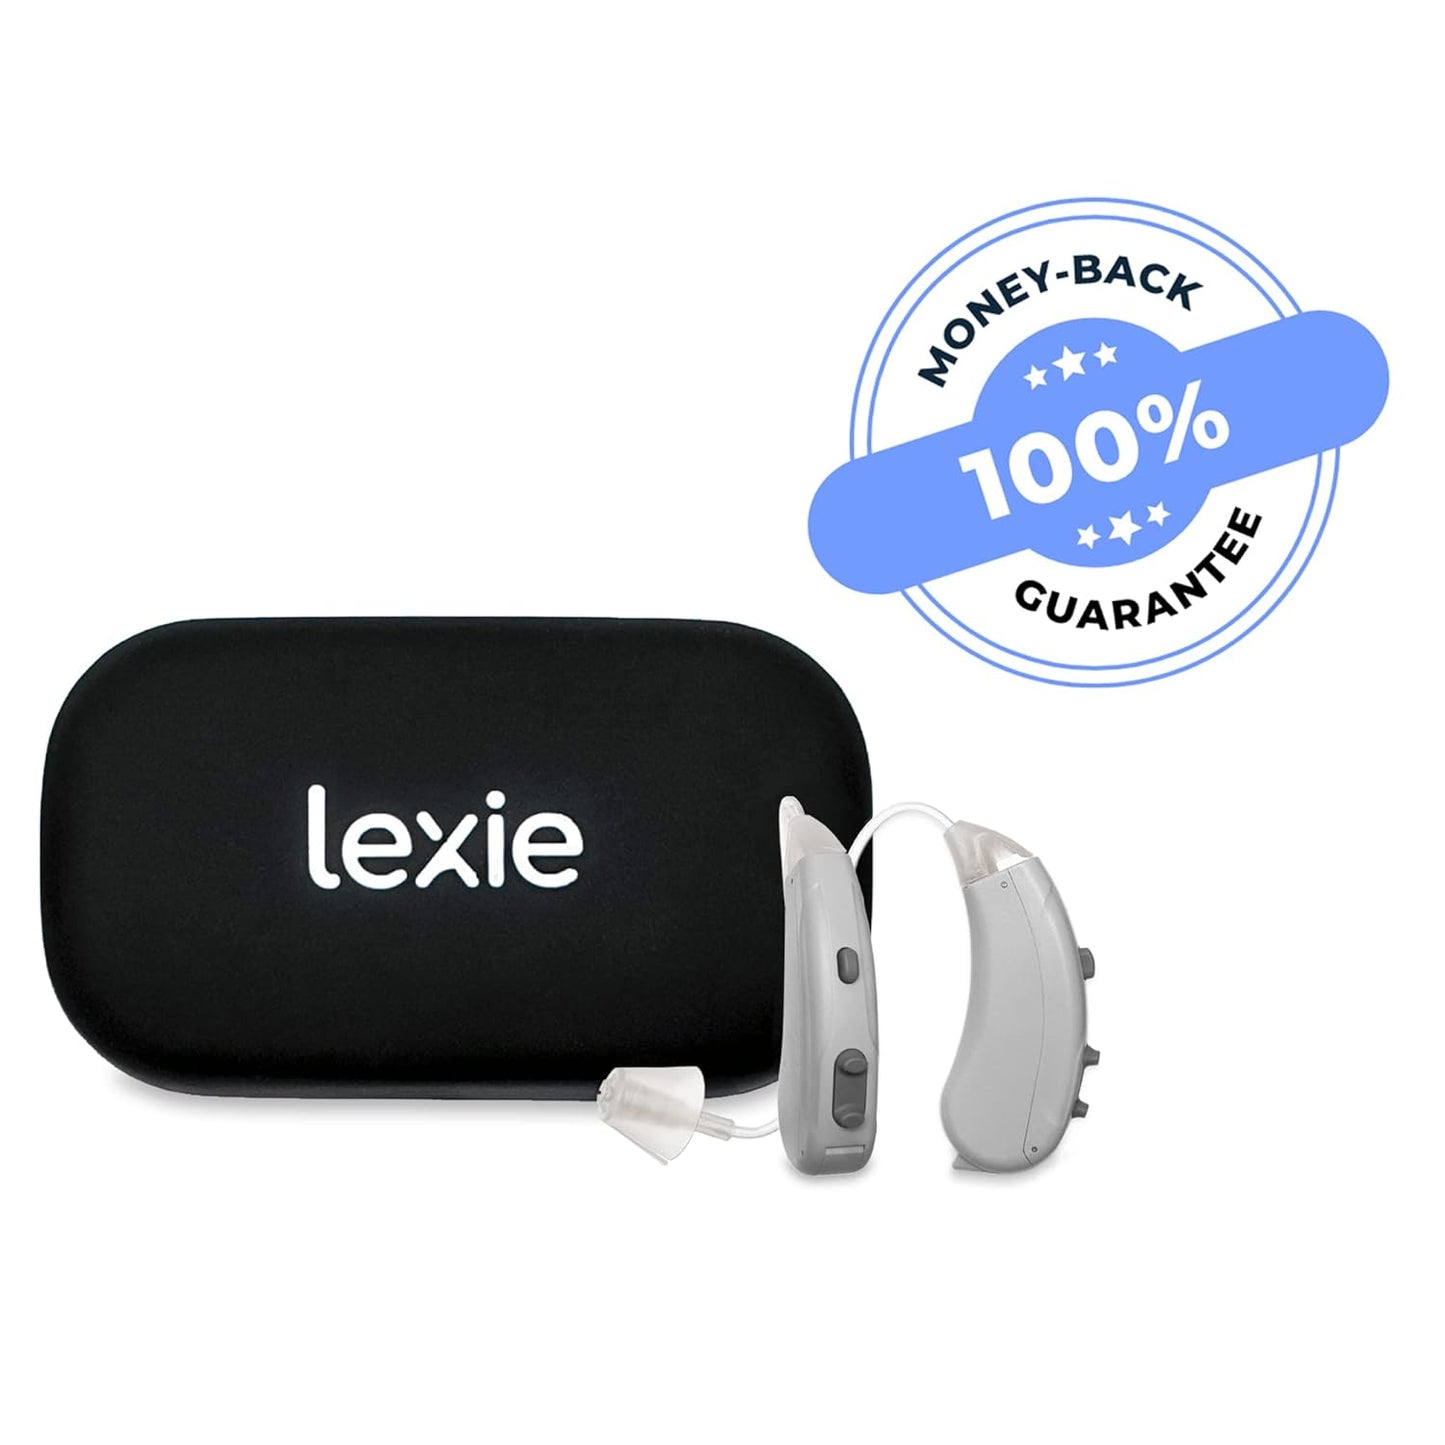 Lexie Lumen Self-Fitting OTC Hearing Aids | Mild to Moderate Hearing Loss | Bluetooth Hearing Aid with Invisible Fit | Directional Hearing, Advanced Battery Power & Smartphone Control (Gray) (Gray)